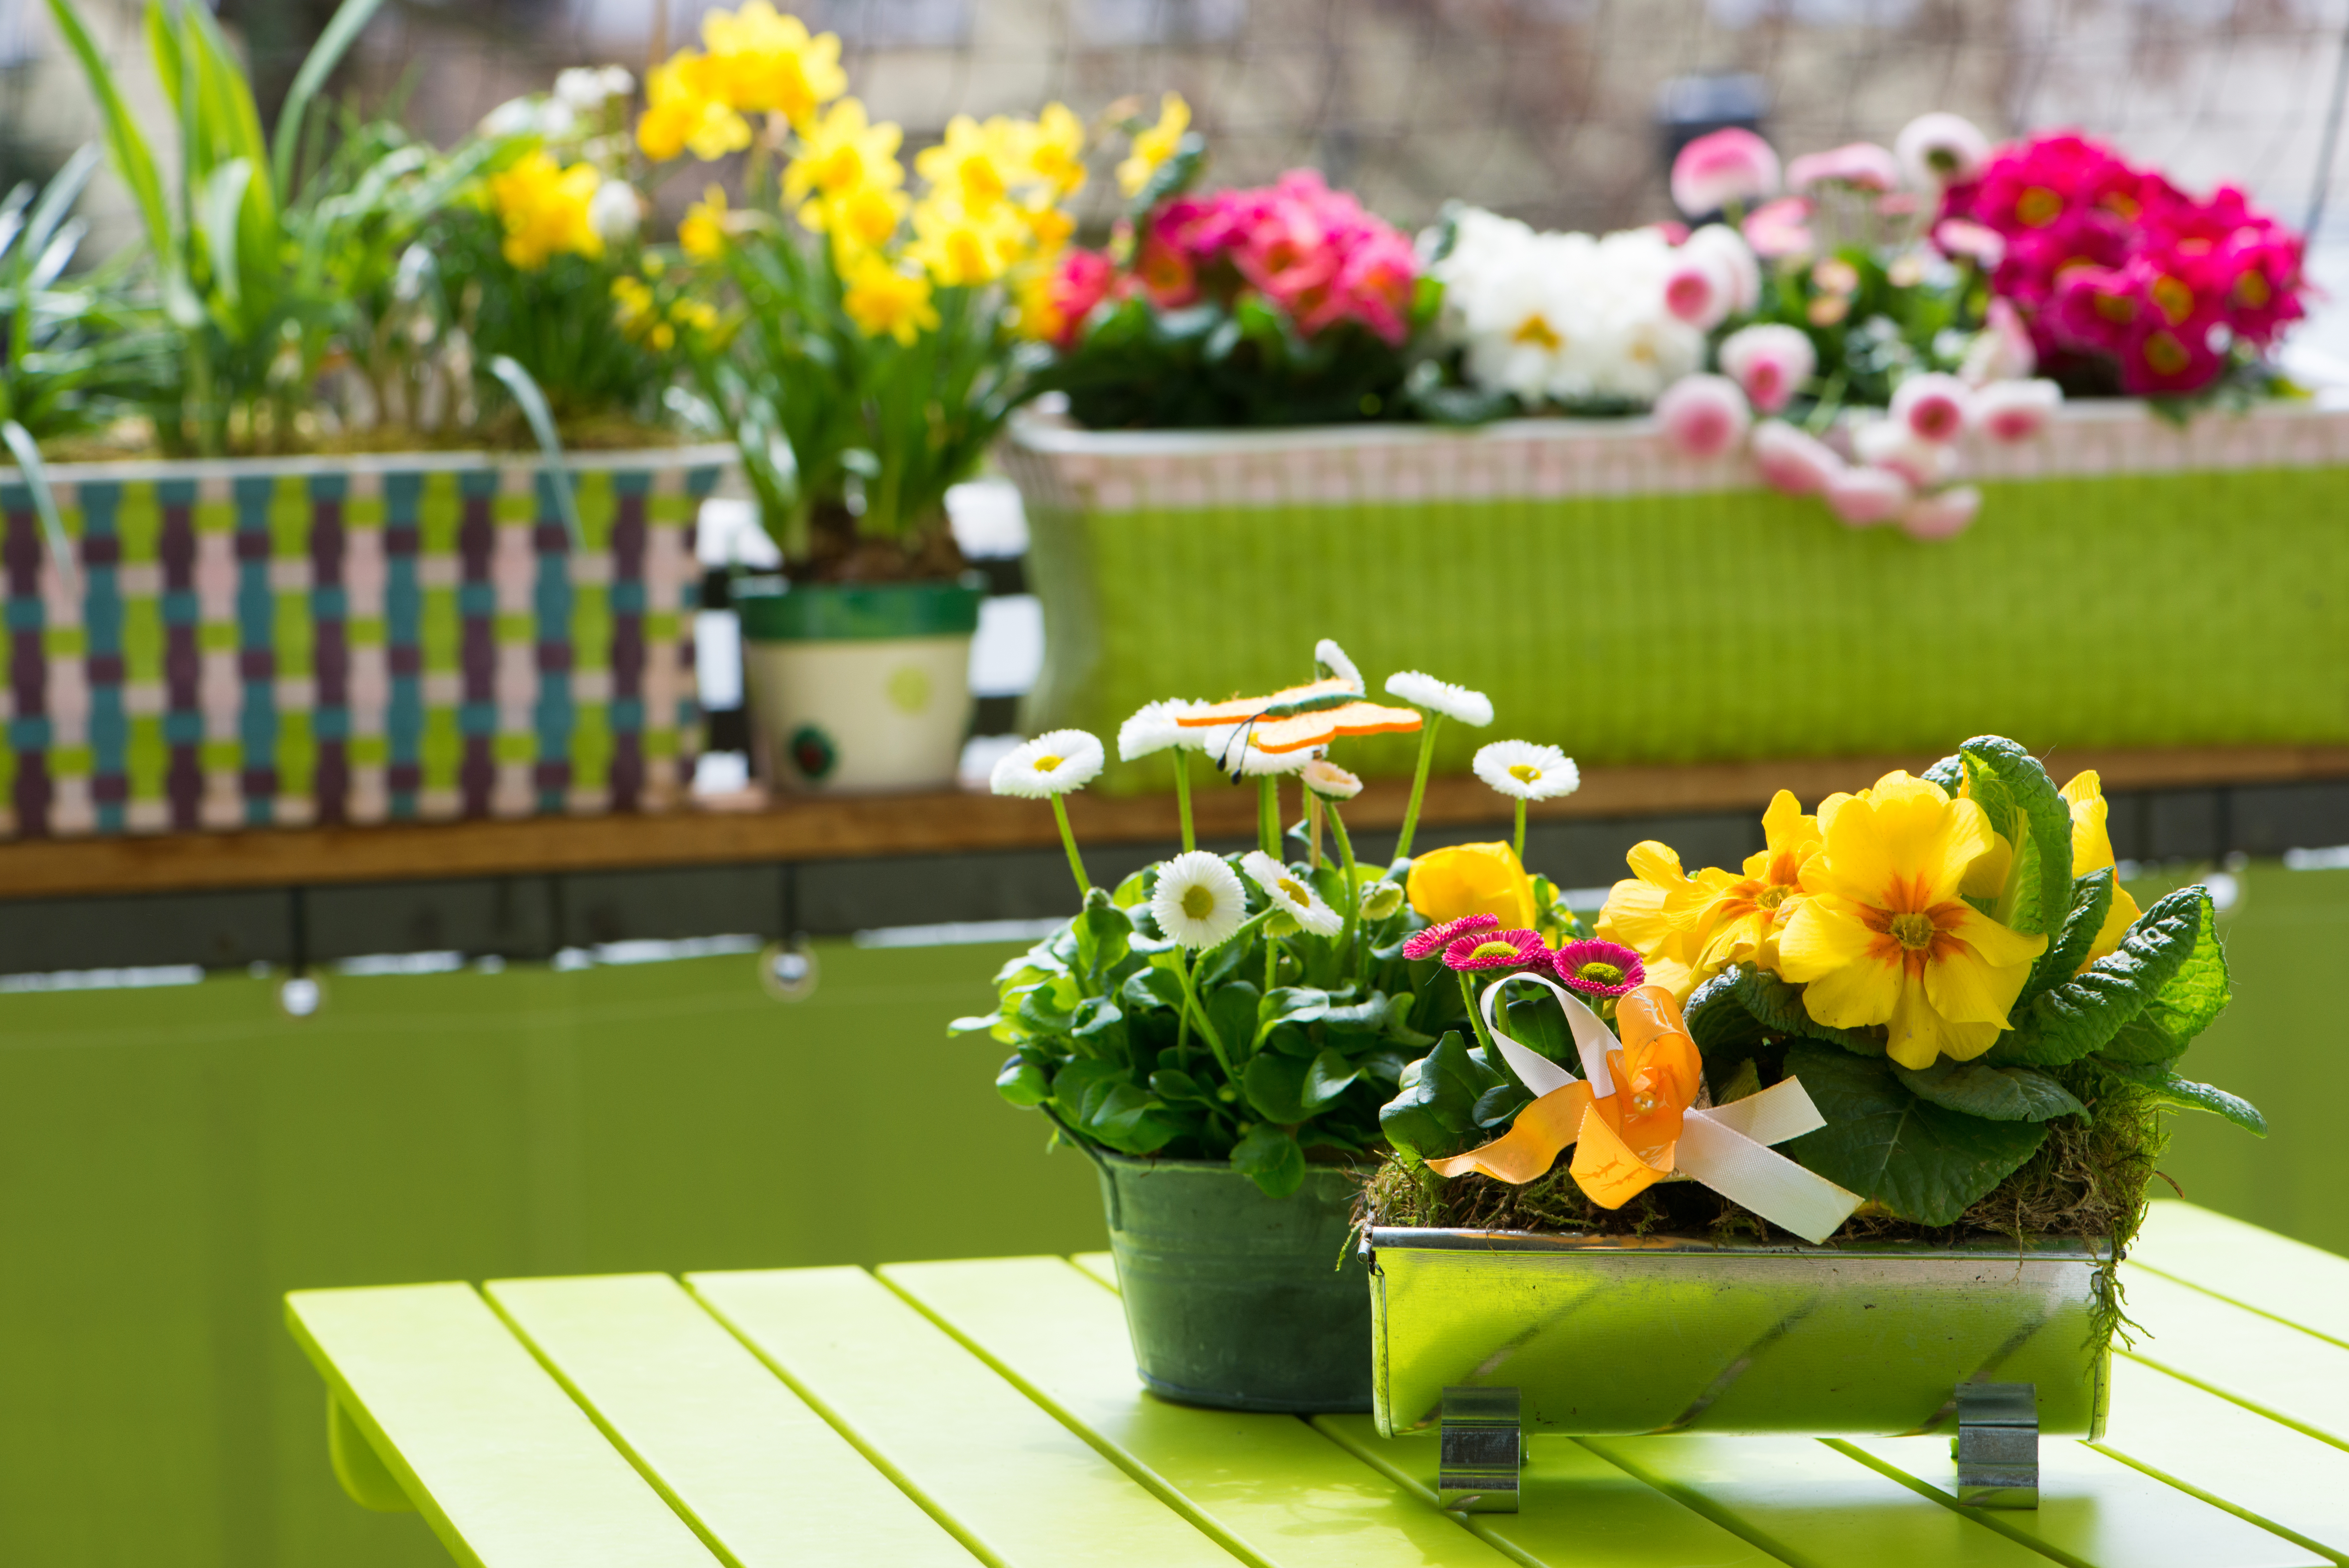 flowers on bright green painted table 